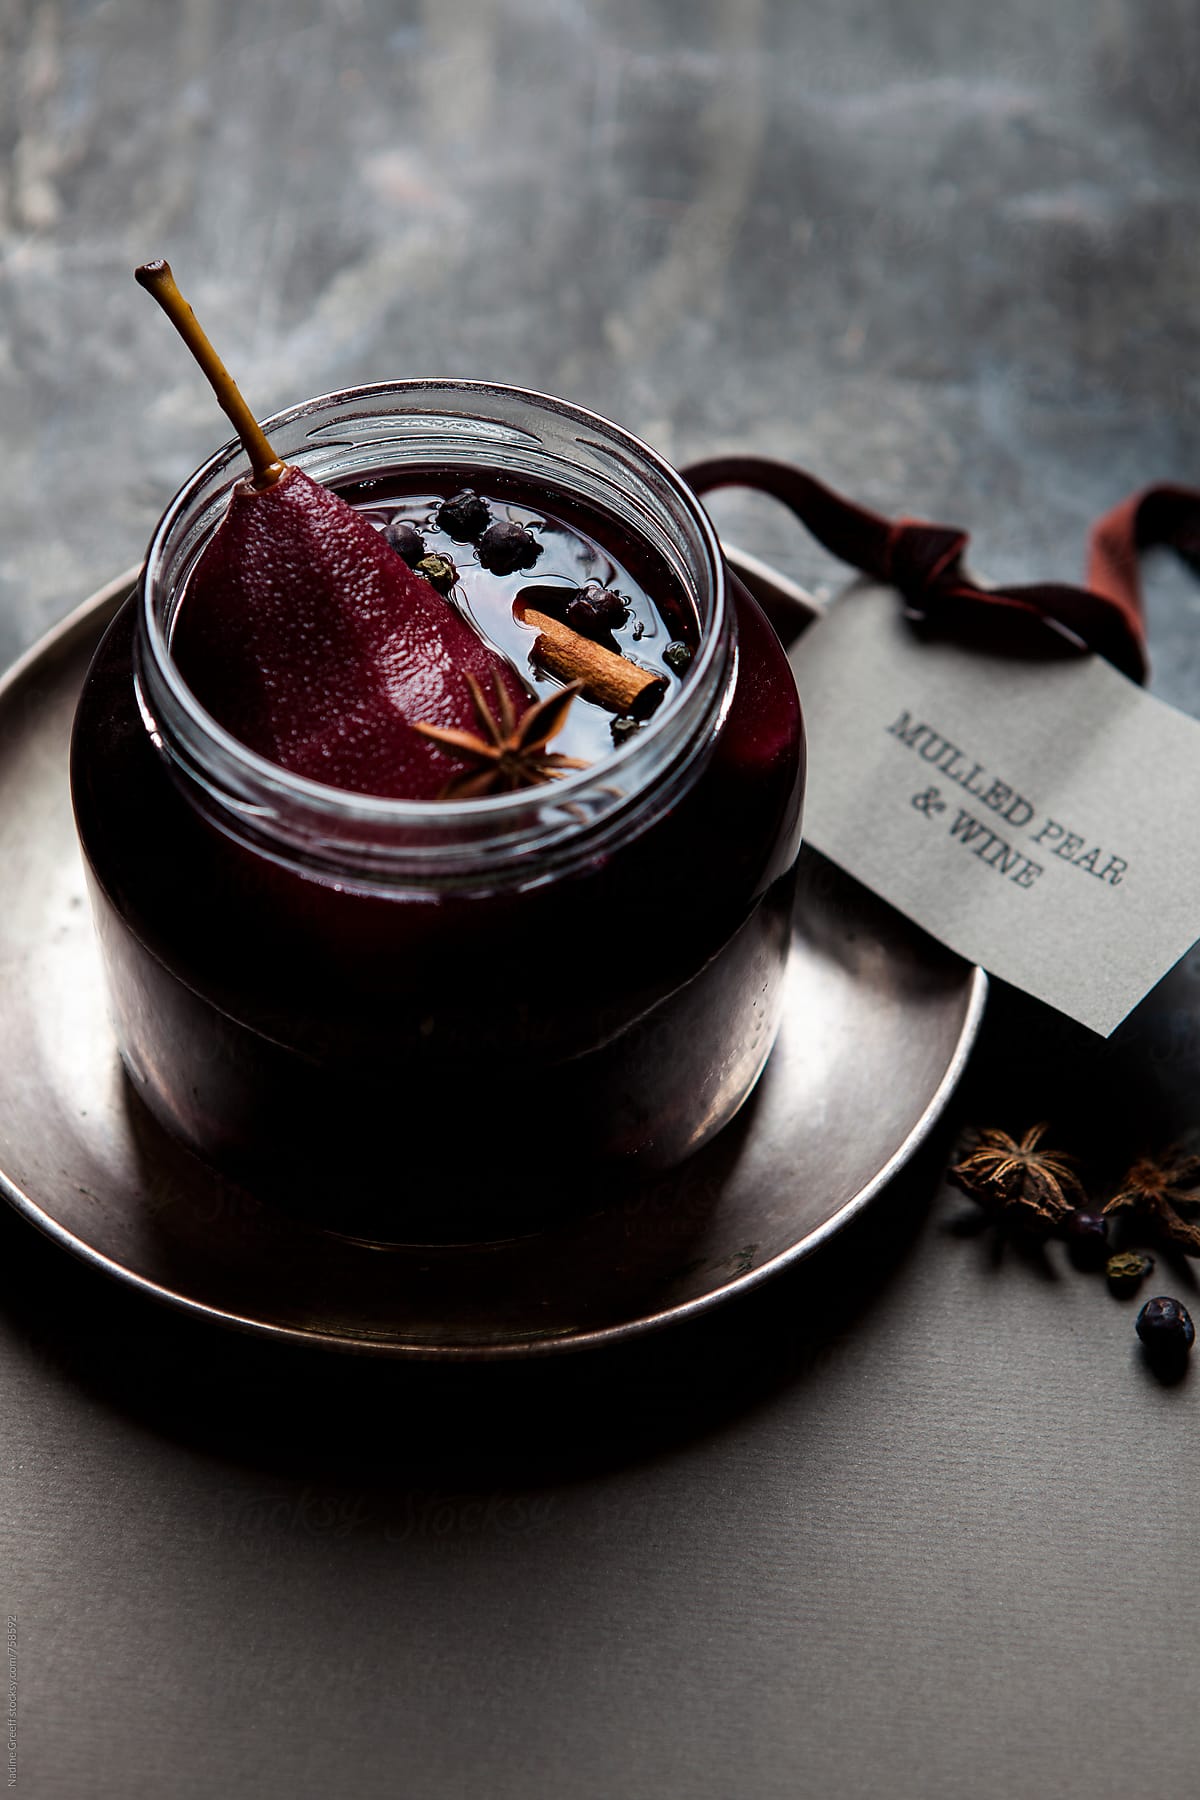 Poached pears in mulled red wine with juniper berries, cinnamon and star anise